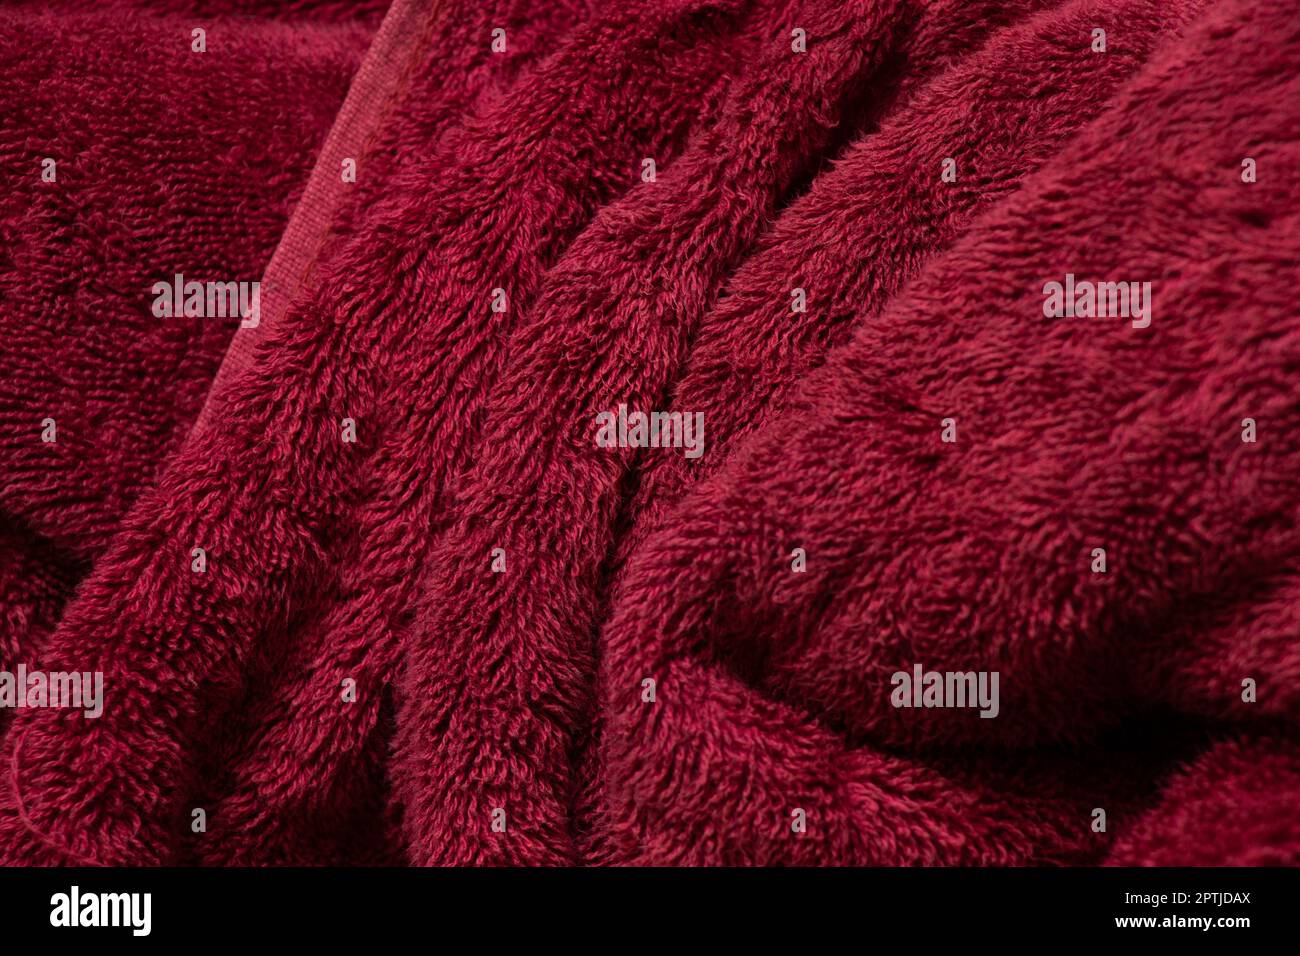 large red towel crumpled as a background close up Stock Photo